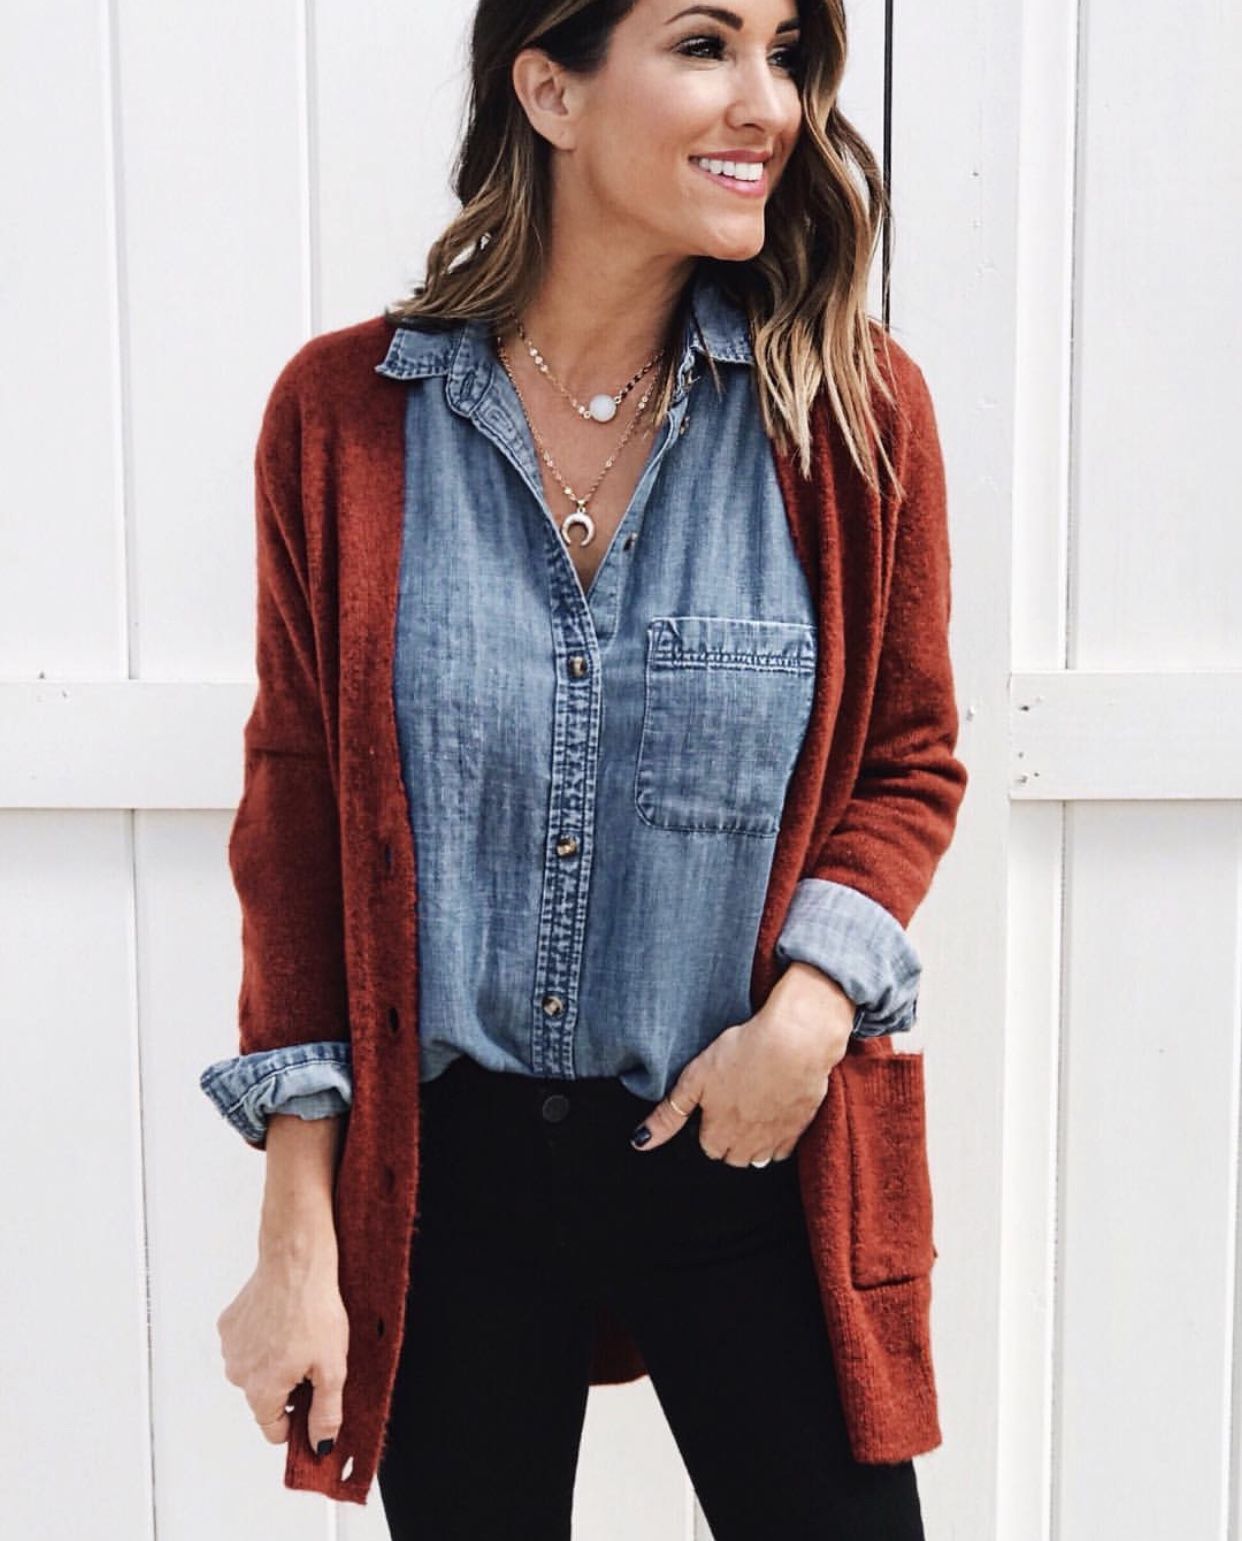 ALL THINGS OLD NAVY! - The Sister Studio - ALL THINGS OLD NAVY! - The Sister Studio -   12 everyday style 2019 ideas